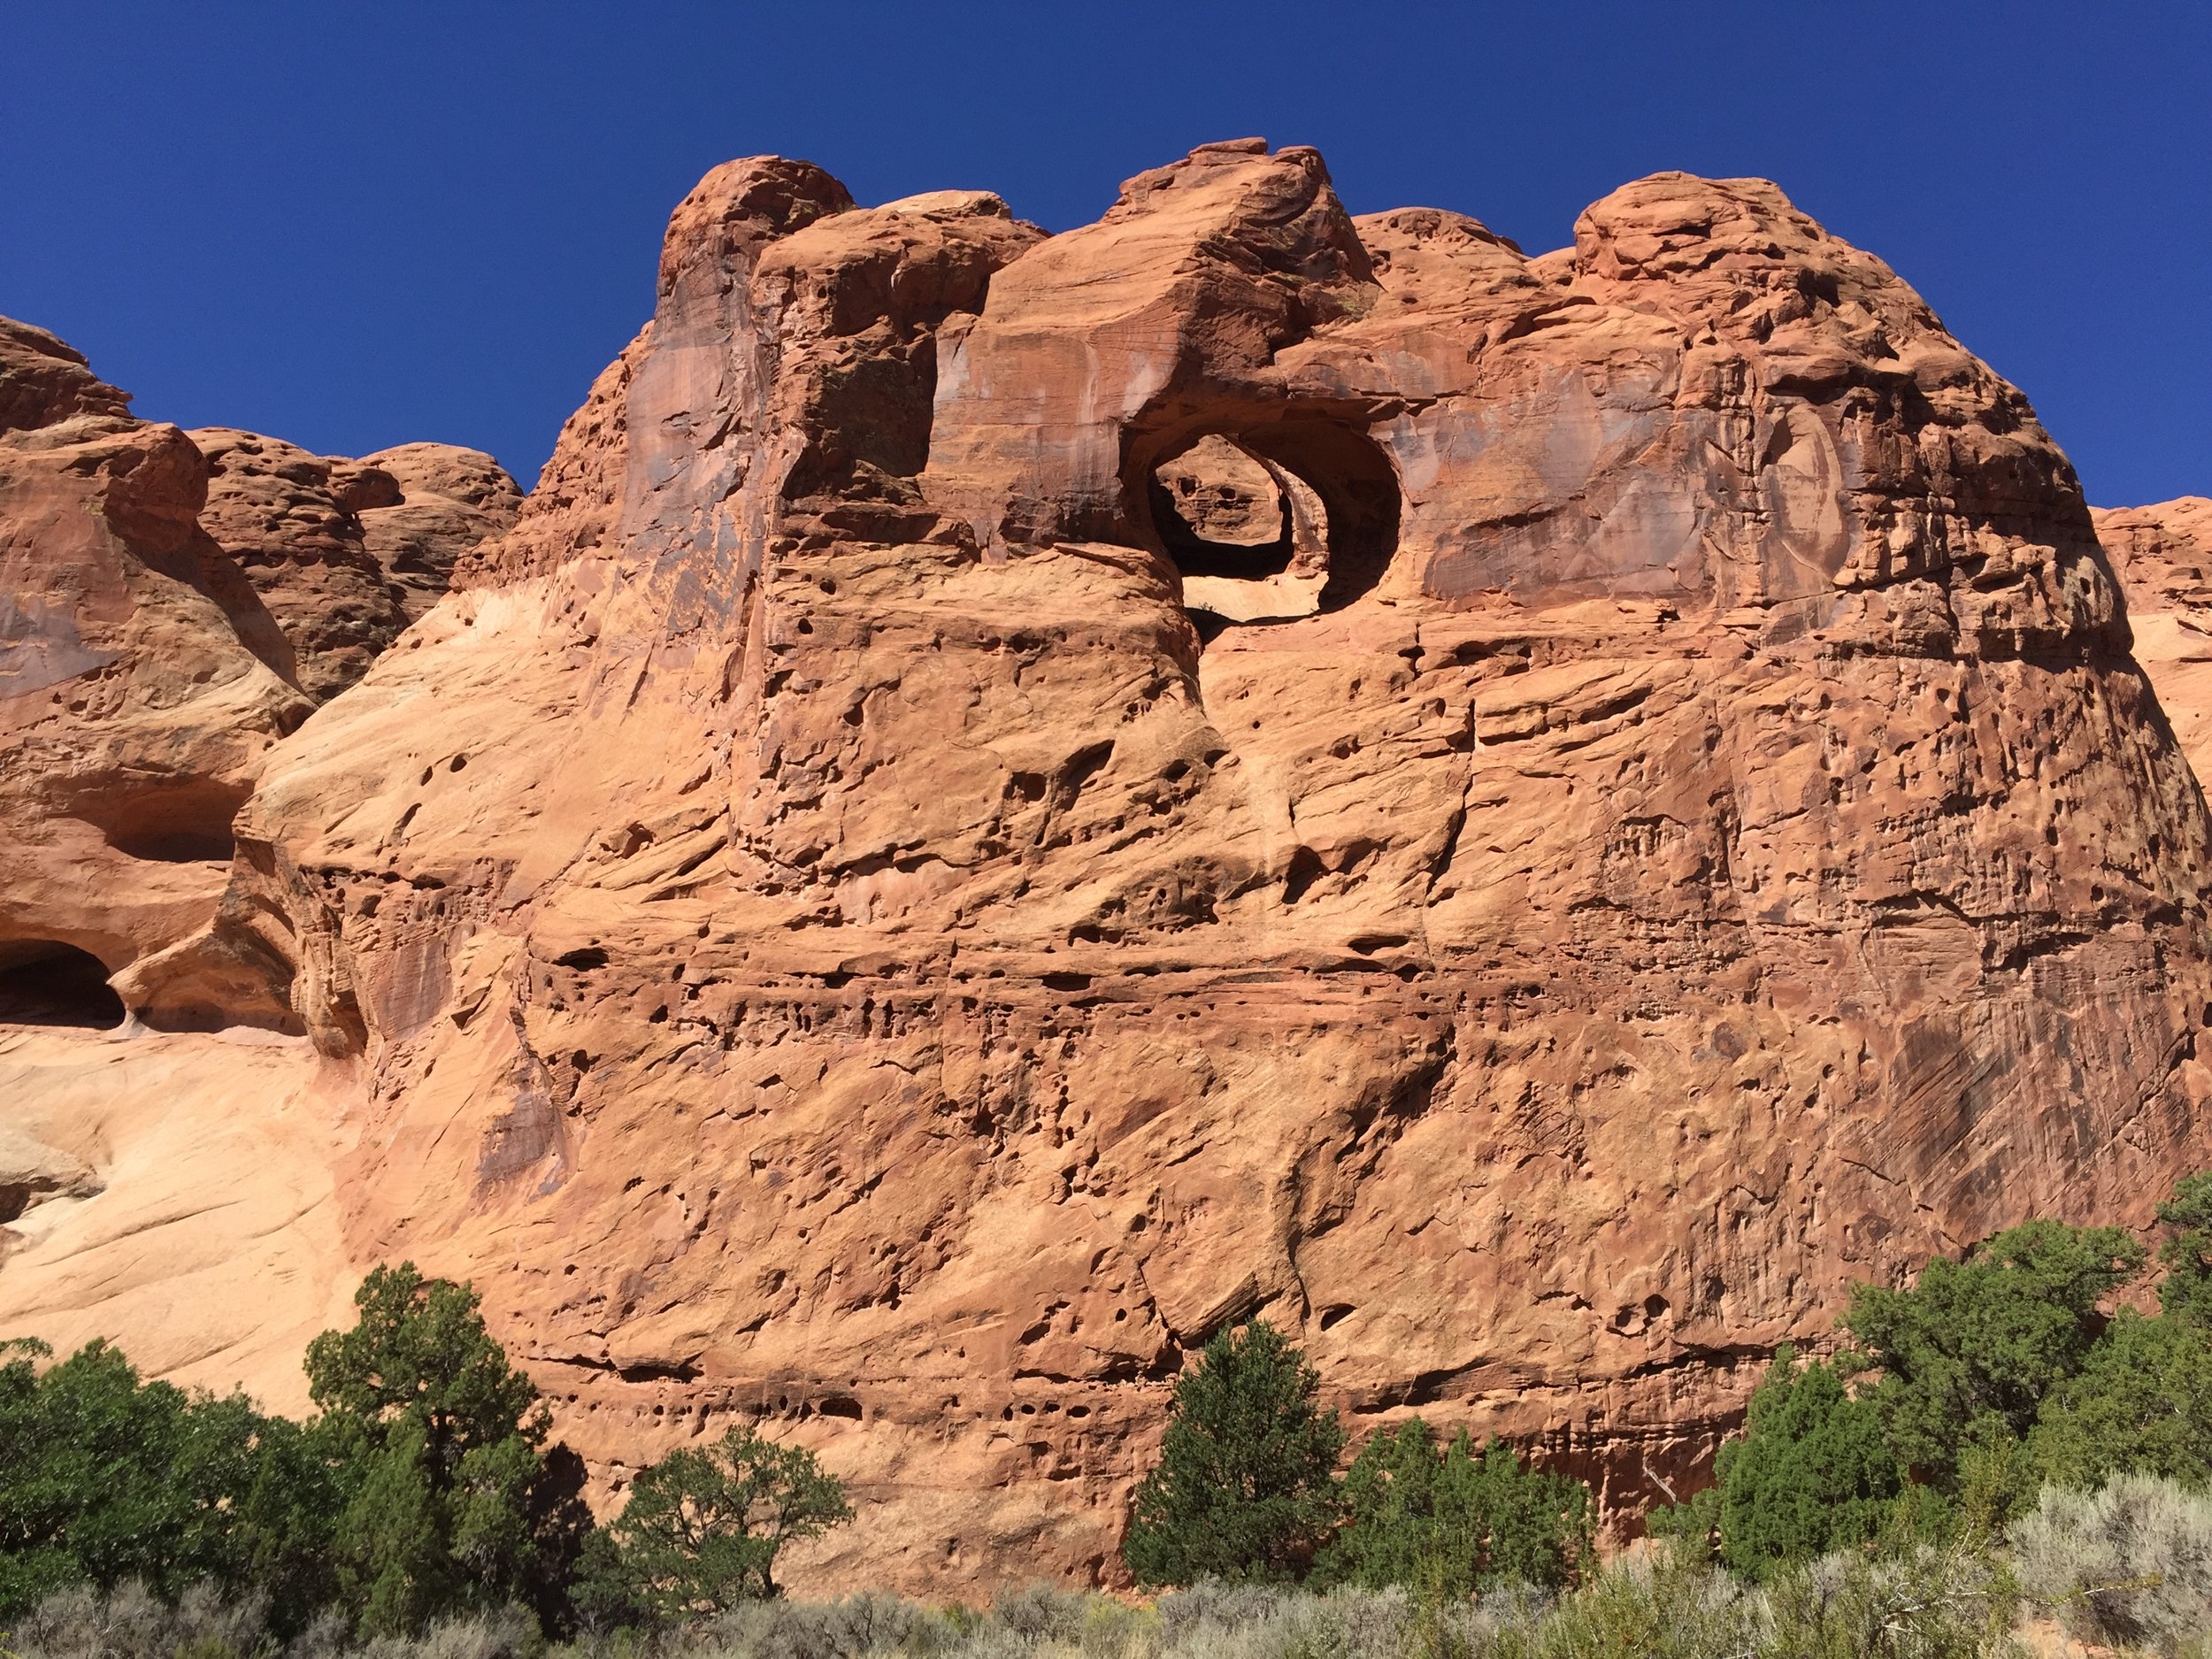   AUGUST, 2017 – CAPITOL REEF NATIONAL PARK: Wind is also a large factor in the erosion of rock within the park, not only in blowing away the top layer of material, but blasting the cliff faces with sand and debris.  